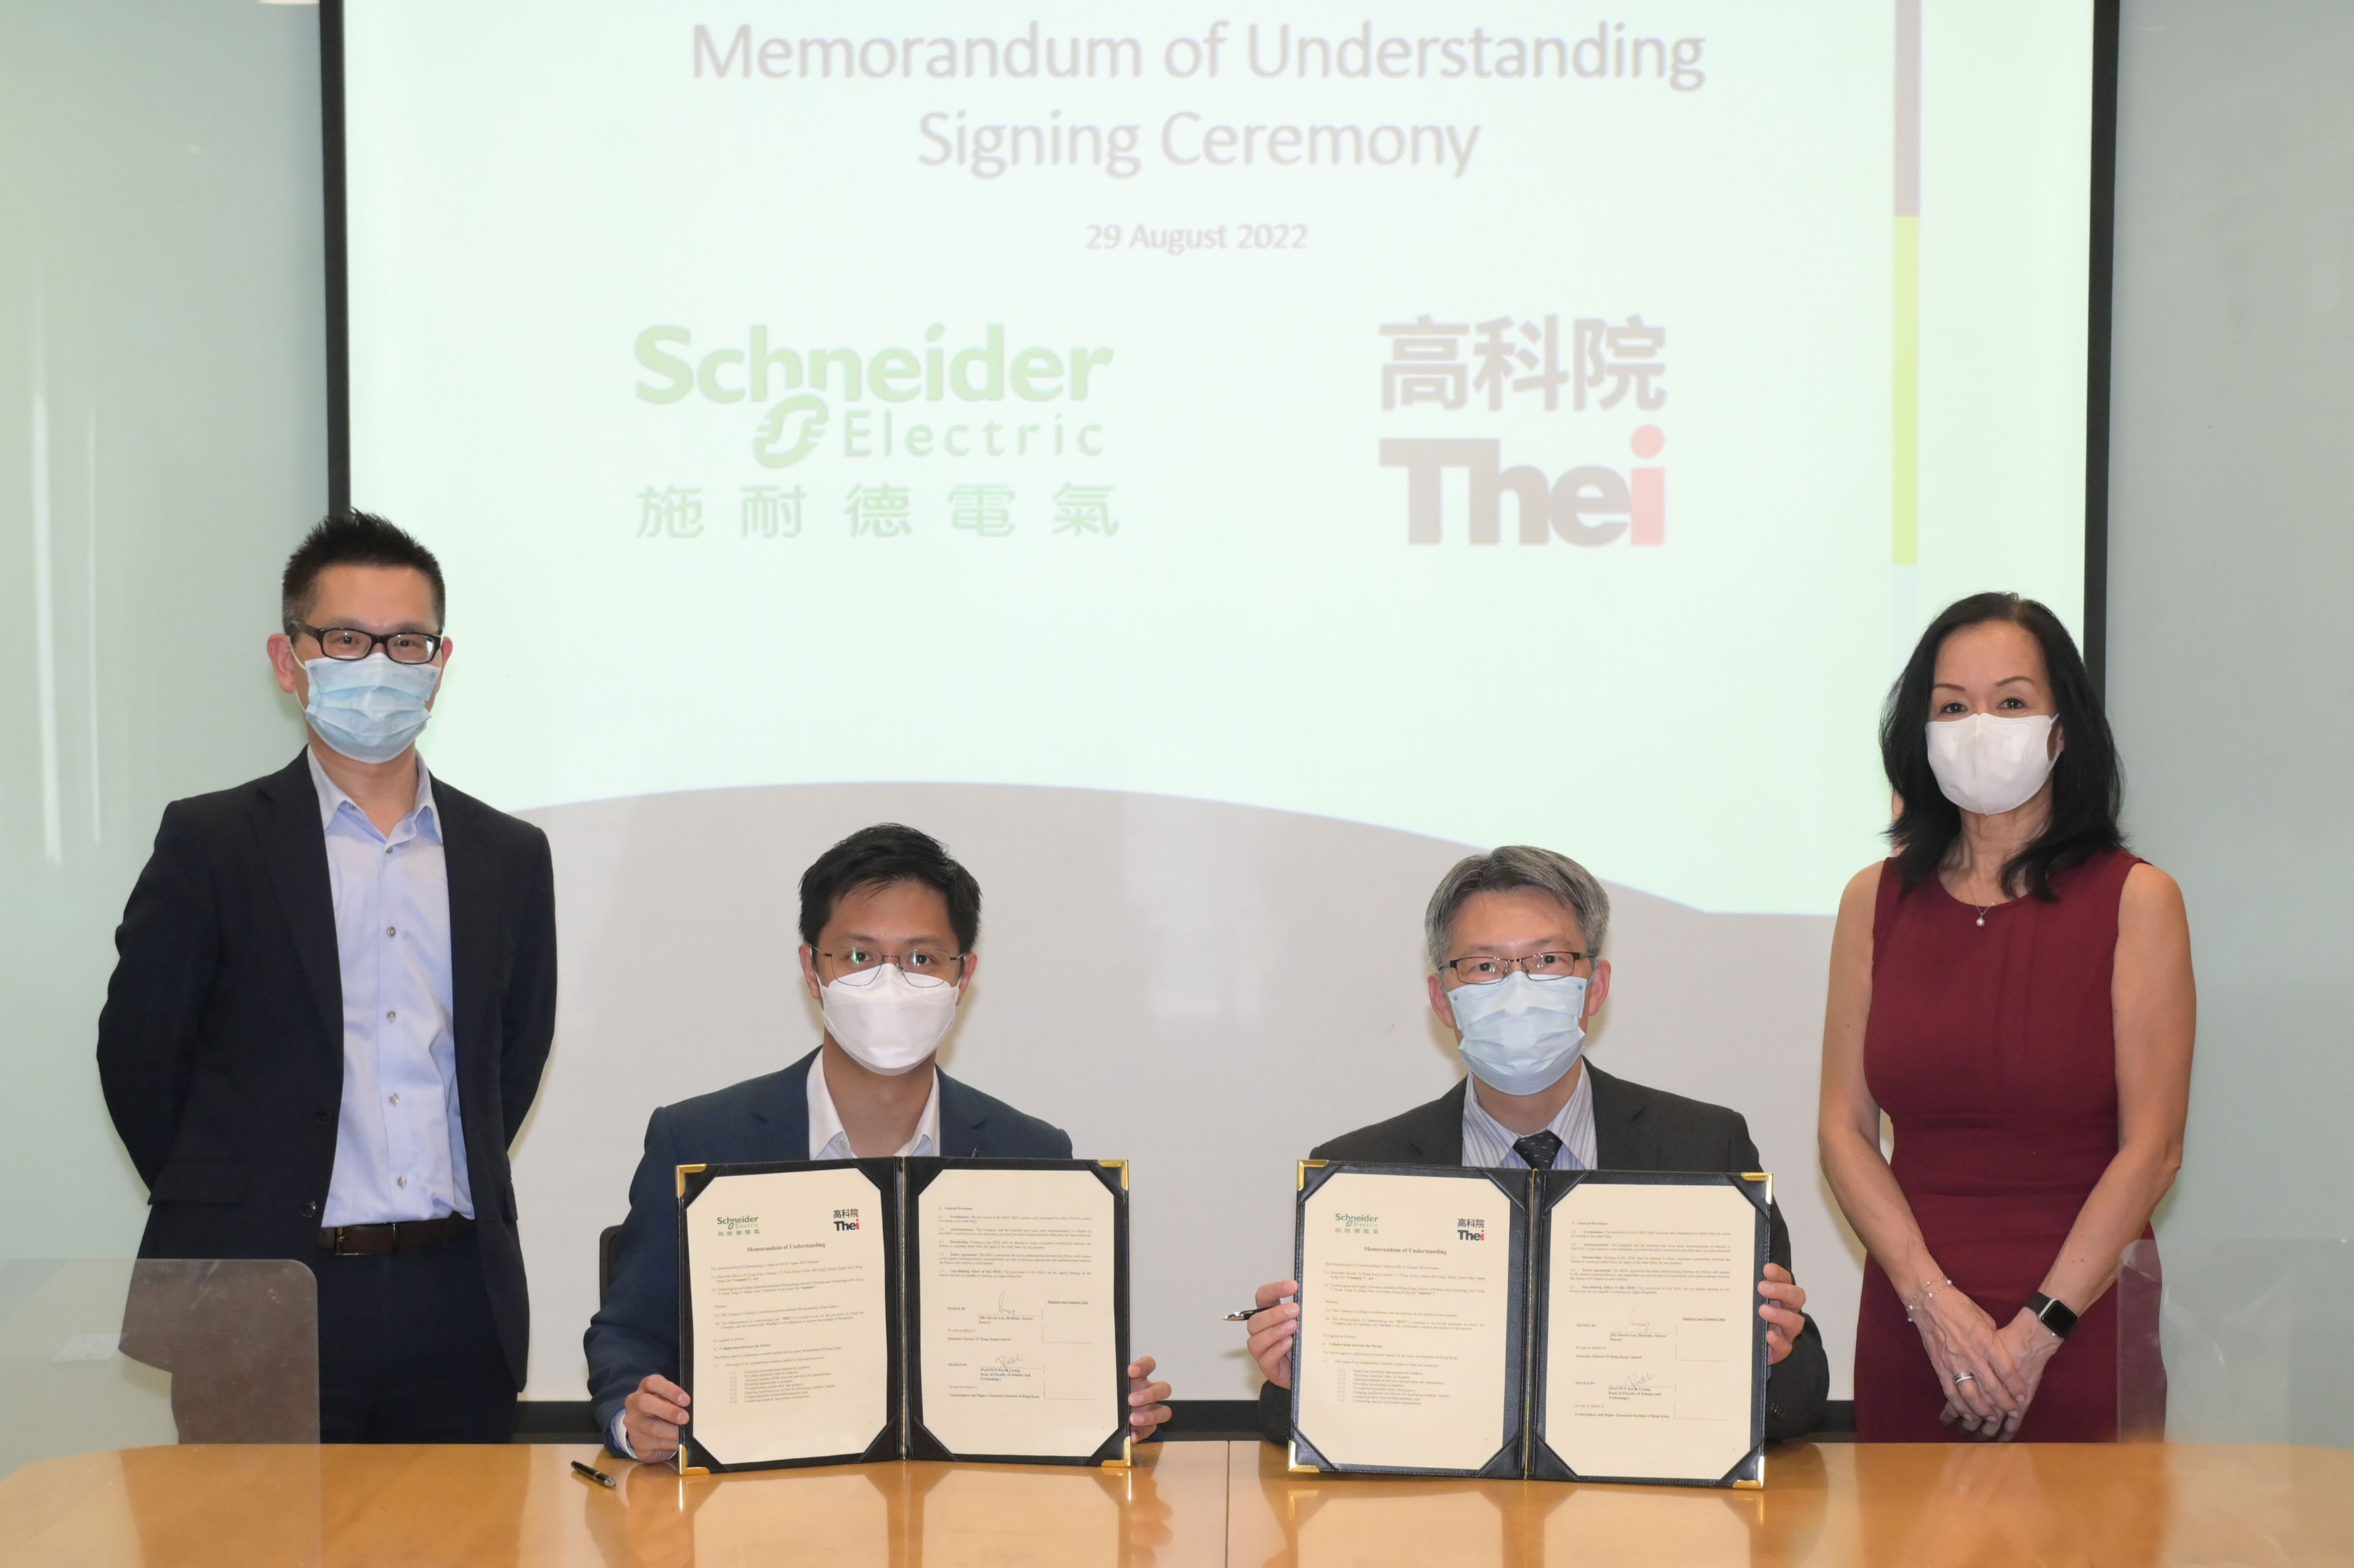 Mr Steven Lee, Director, Secure Power, Schneider Electric Hong Kong (second from left) and Professor Pun Kwok Leung, Dean of Faculty of Science and Technology, Technological and Higher Education Institute of Hong Kong (second from right), signed the MoU, witnessed by Mr Jonathan Chiu, President, Schneider Electric Hong Kong (left) and Professor Christina Hong, President, Technological and Higher Education Institute of Hong Kong (right).